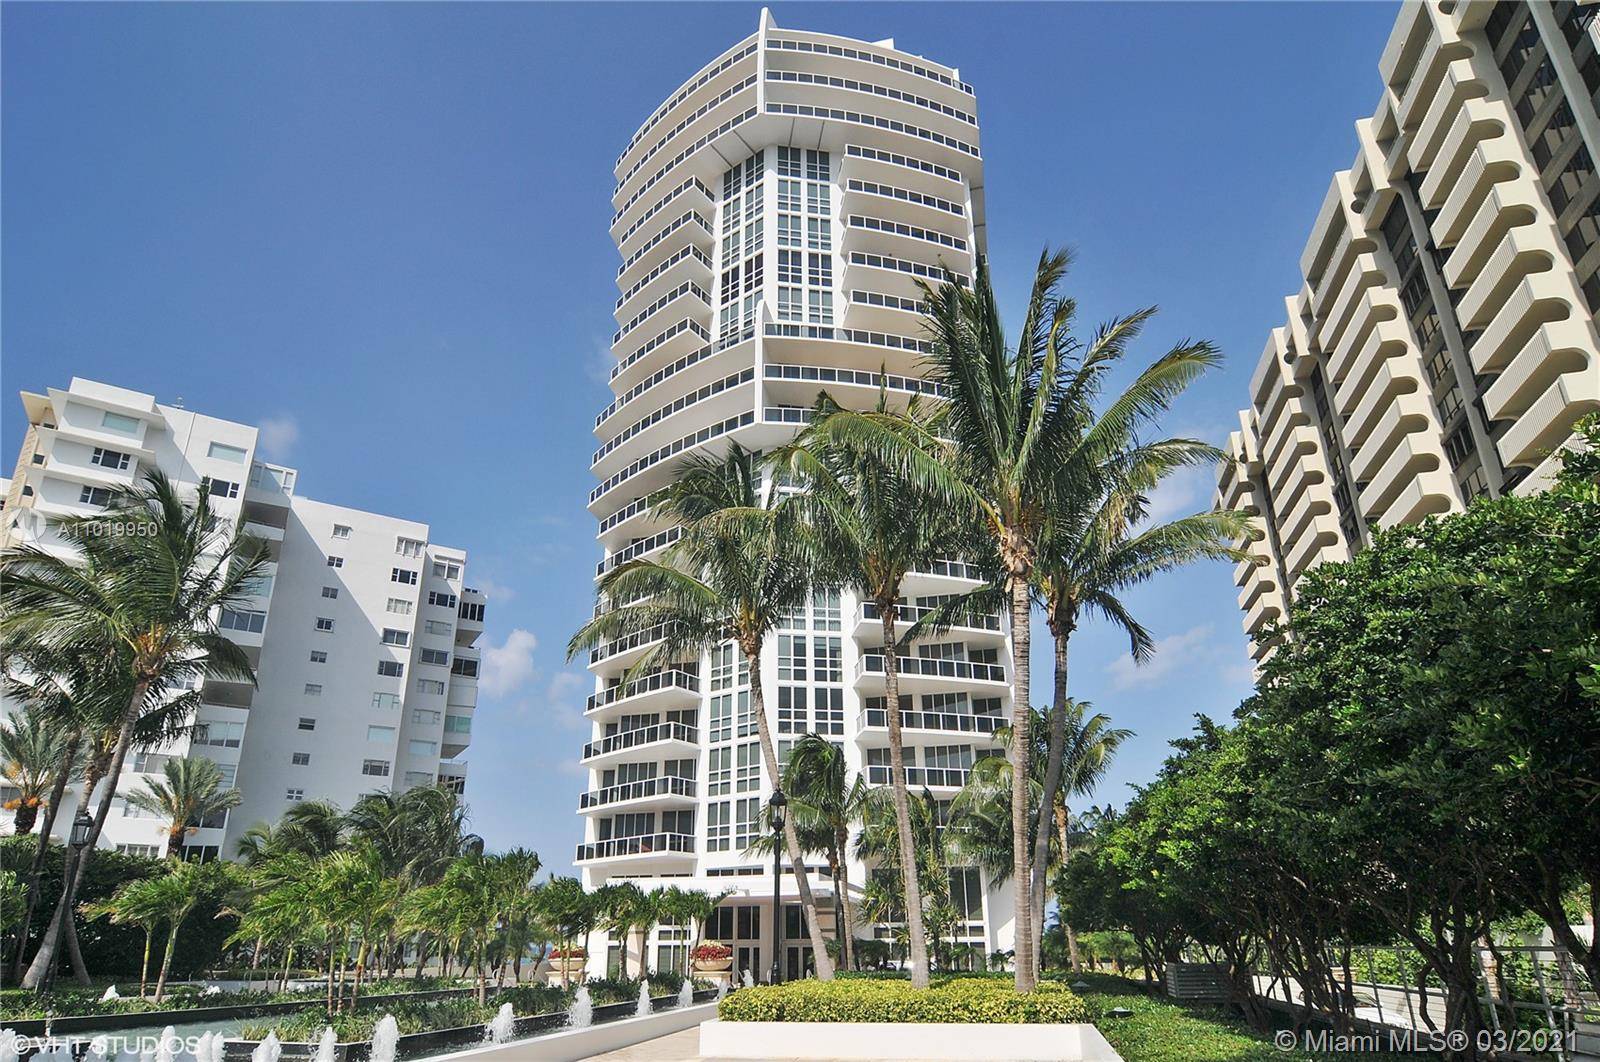 Sought after and stunning Bellini building THE BELLINI LUXURIOUS Beachfront PRESTIGIOUS sought after building IN BAL HARBOUR ON THE OCEAN WITH OCEAN, BAY AND CITY VIEWS.